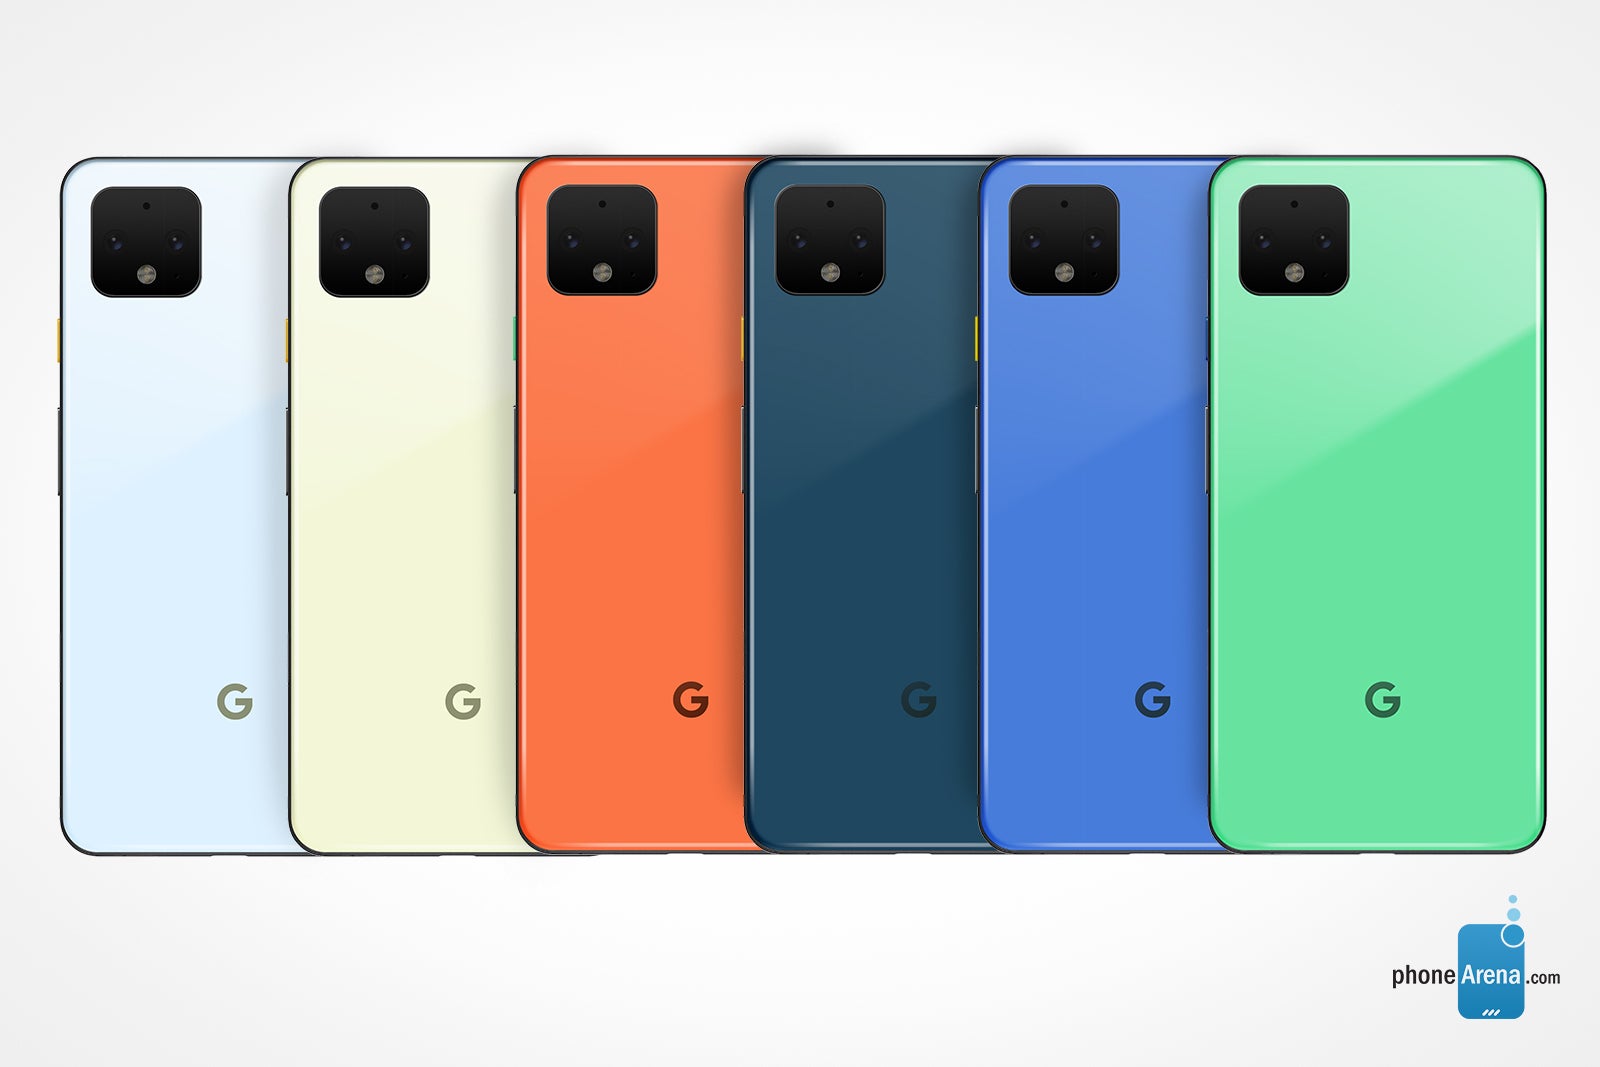 Google Pixel 4 in Android 10 colors concept render - Google Pixel 4 XL in black and white get compared in latest leak